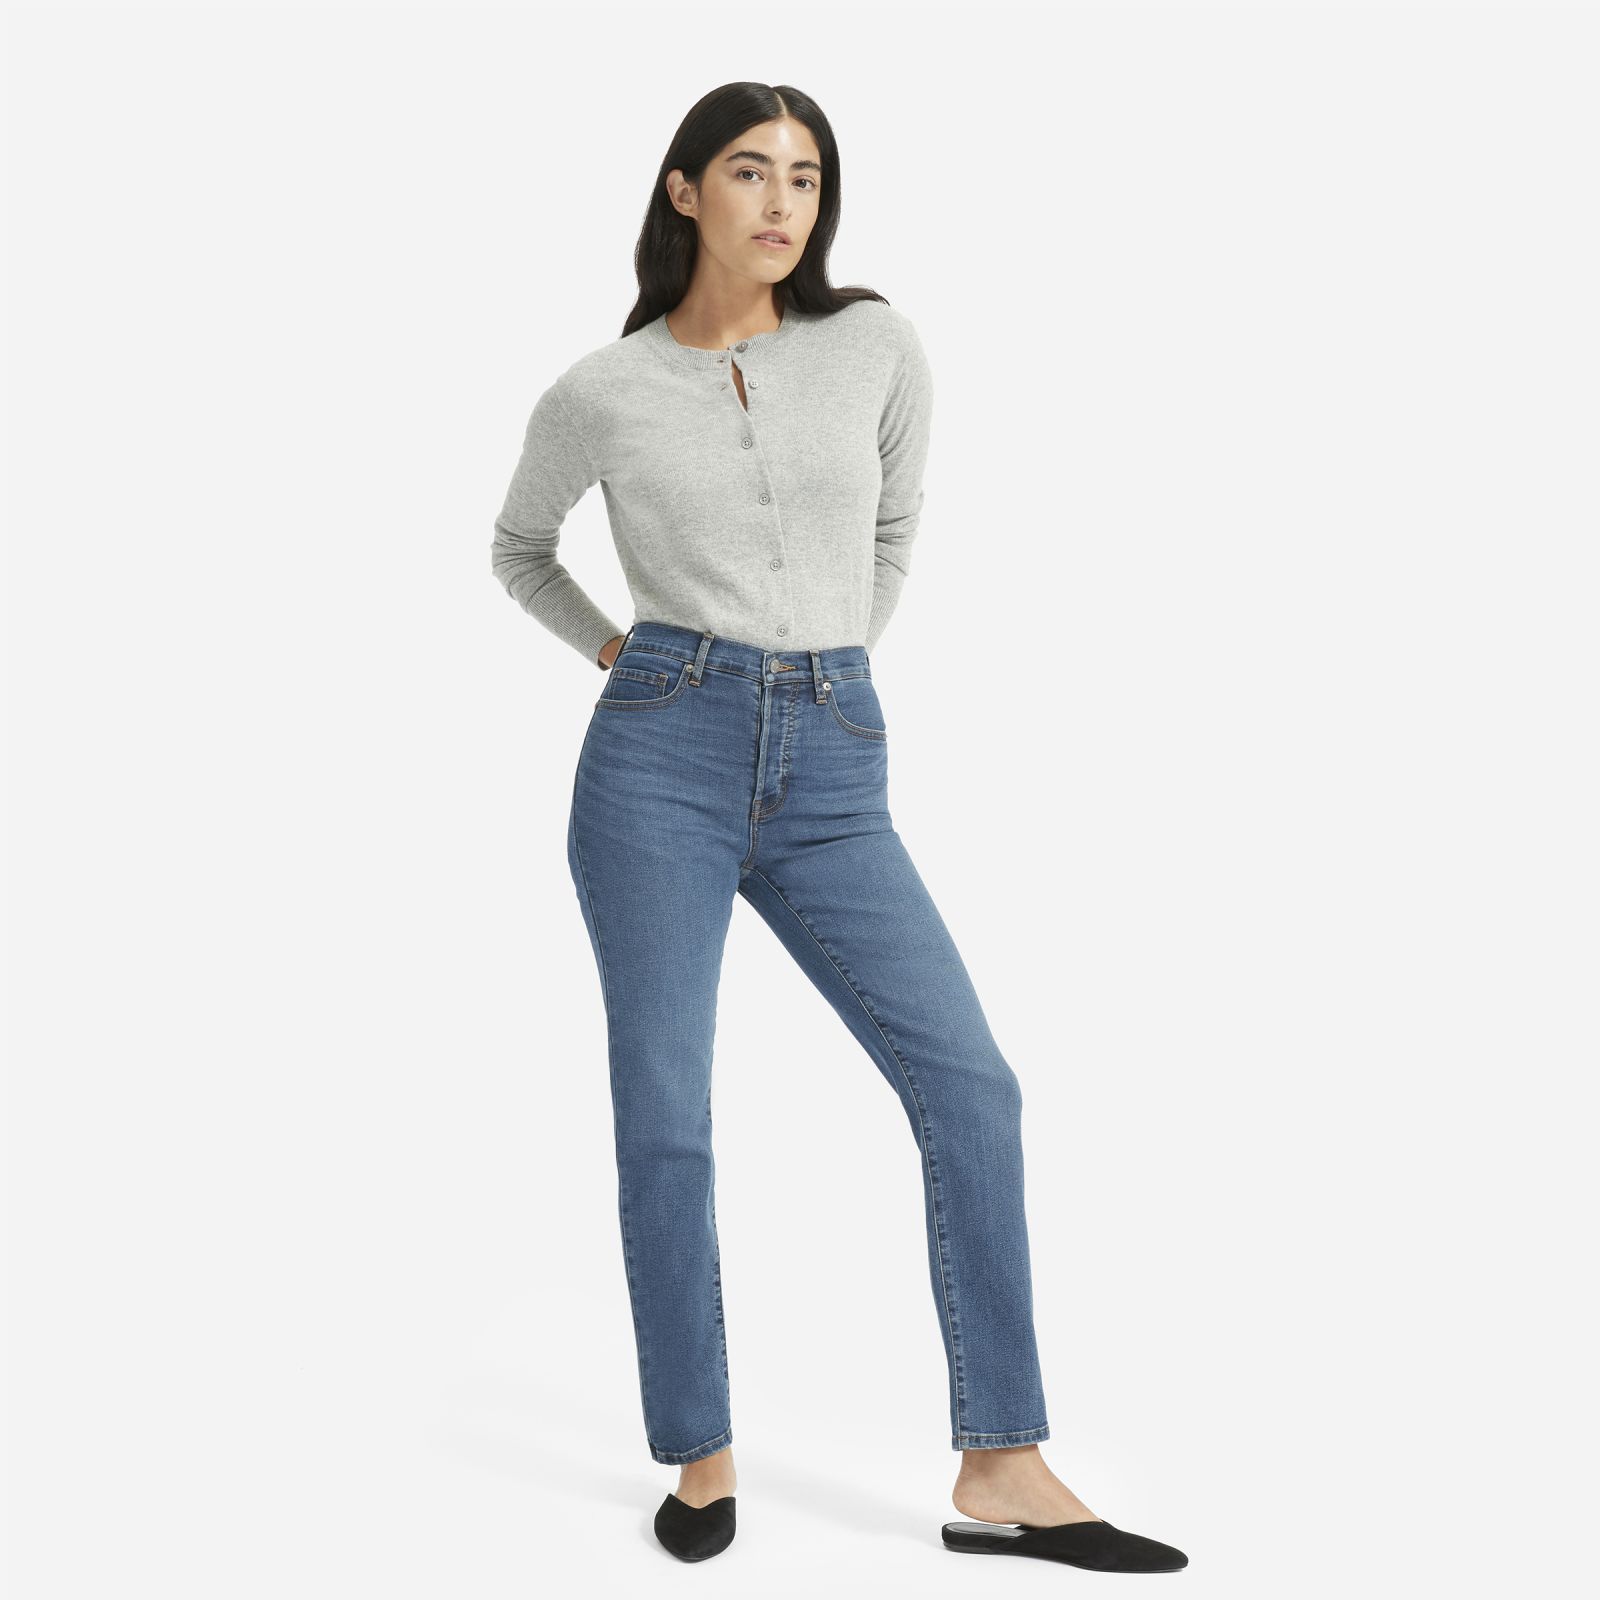 Women's Authentic Stretch High-Rise Cigarette Jean by Everlane in Mid Blue, Size 23 | Everlane